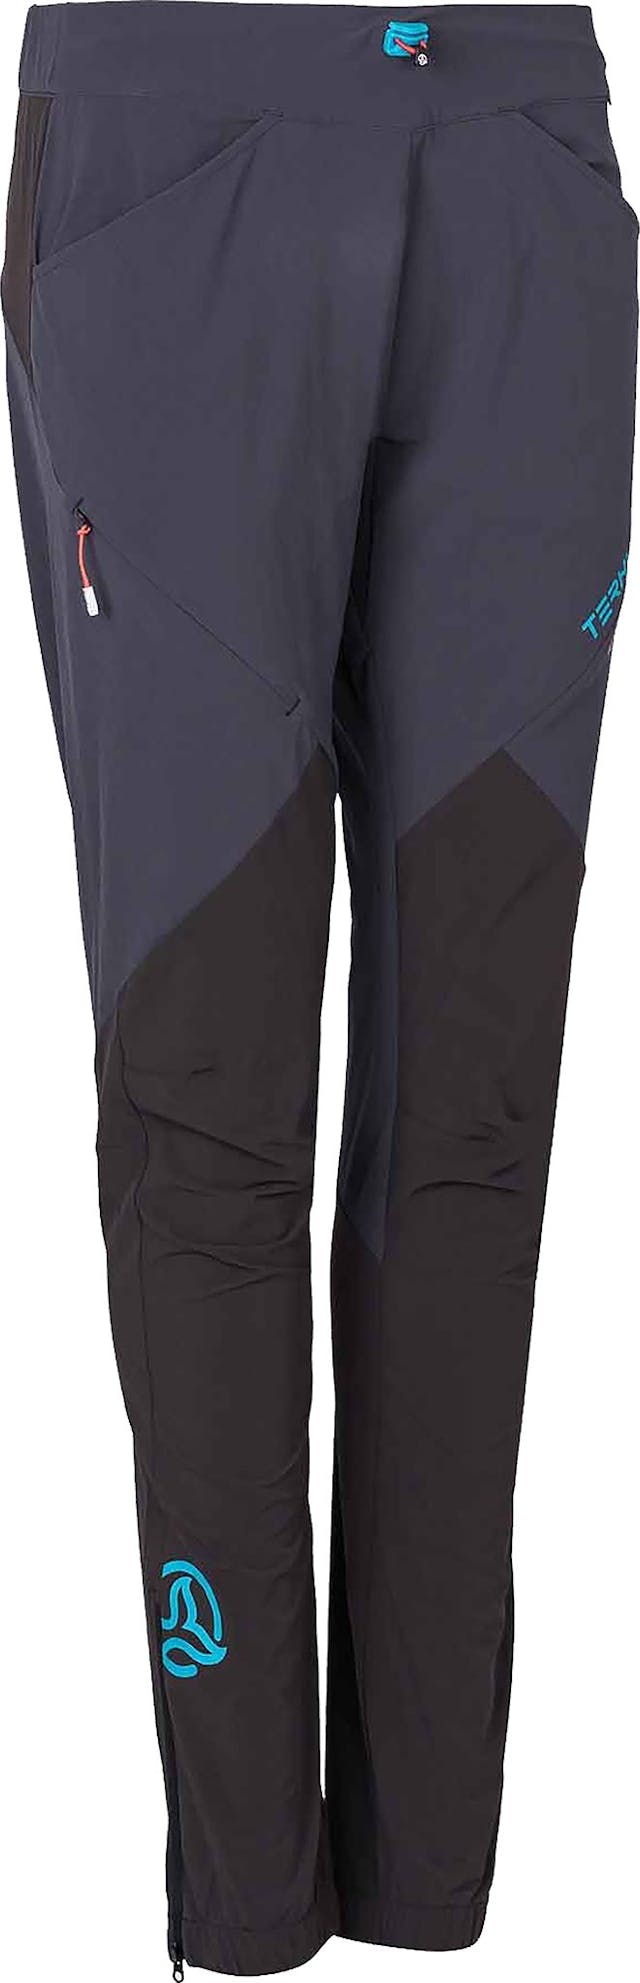 Product image for Lightning Pants - Women's